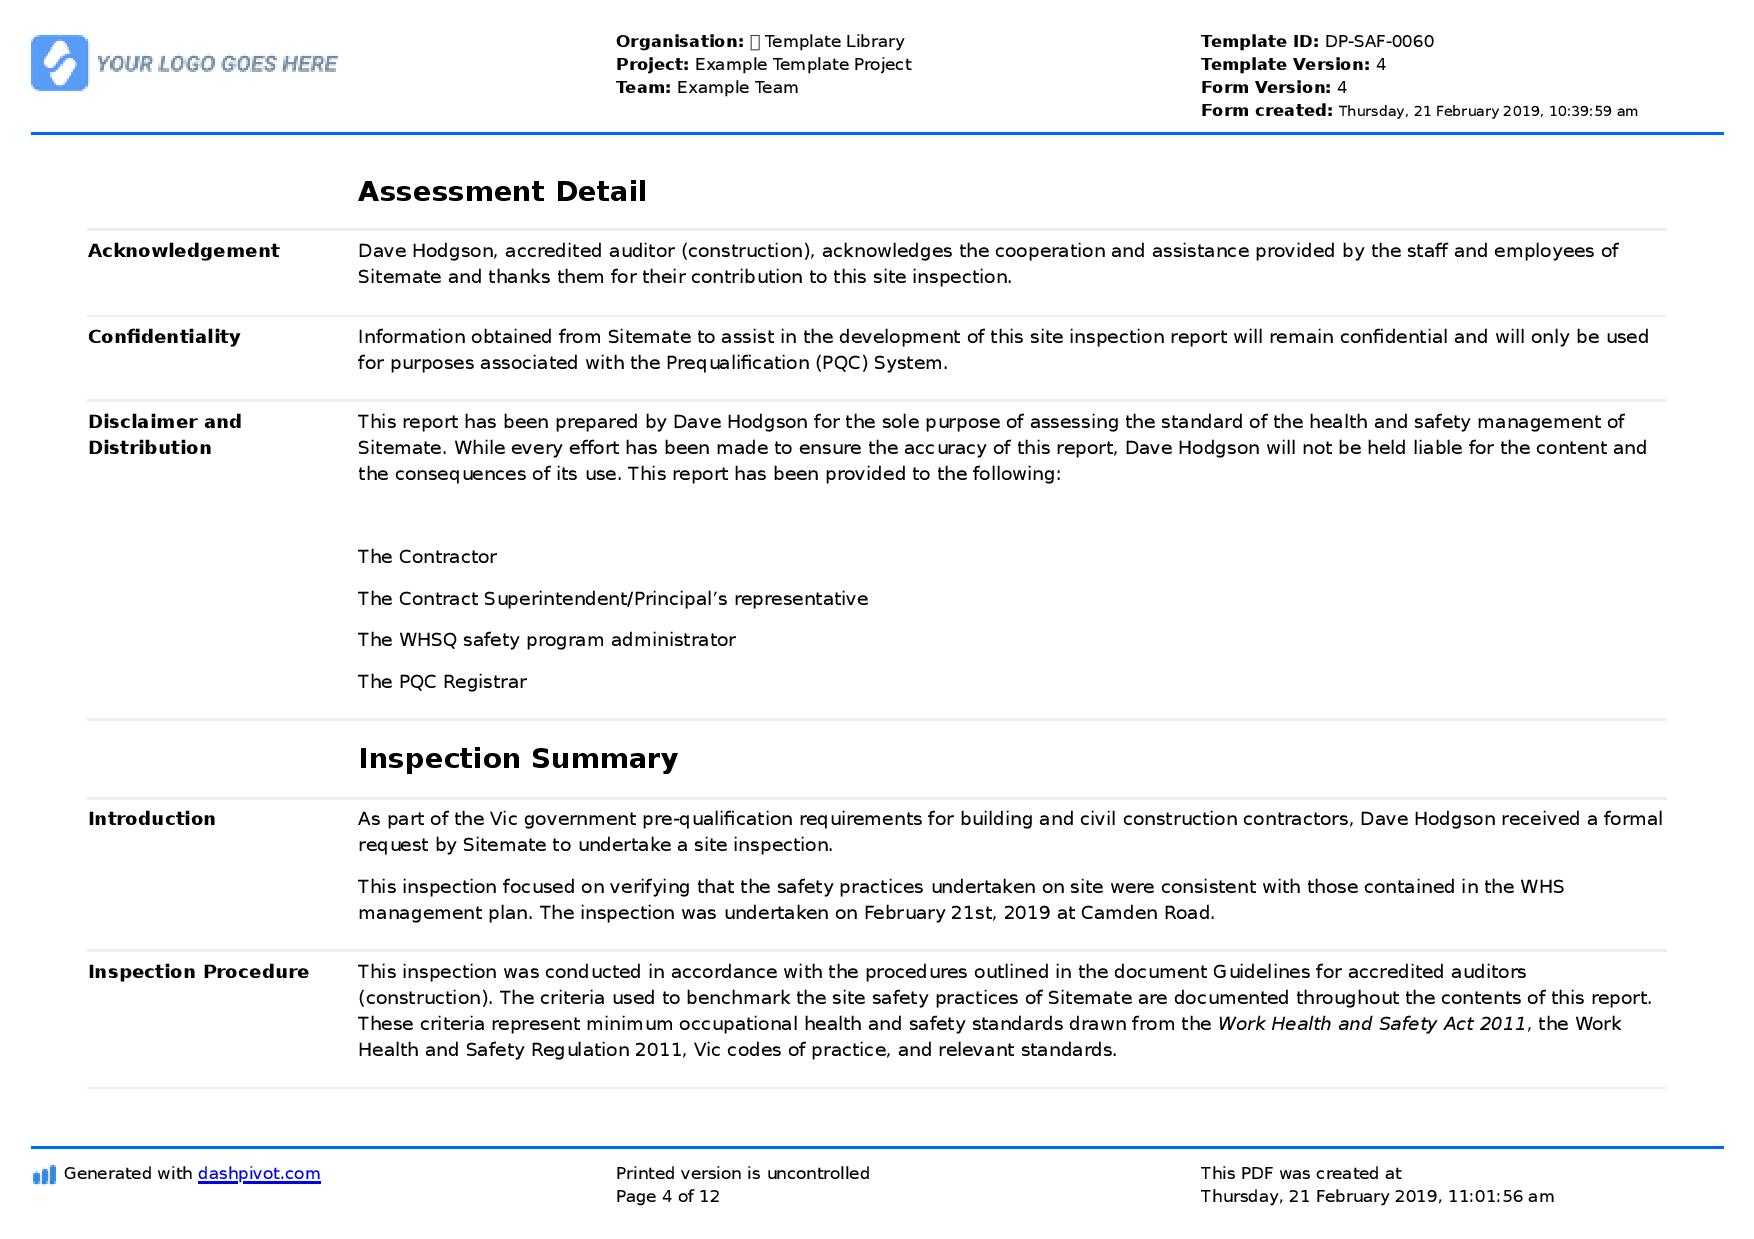 Site Inspection Report: Free Template, Sample And A Proven Pertaining To Property Management Inspection Report Template